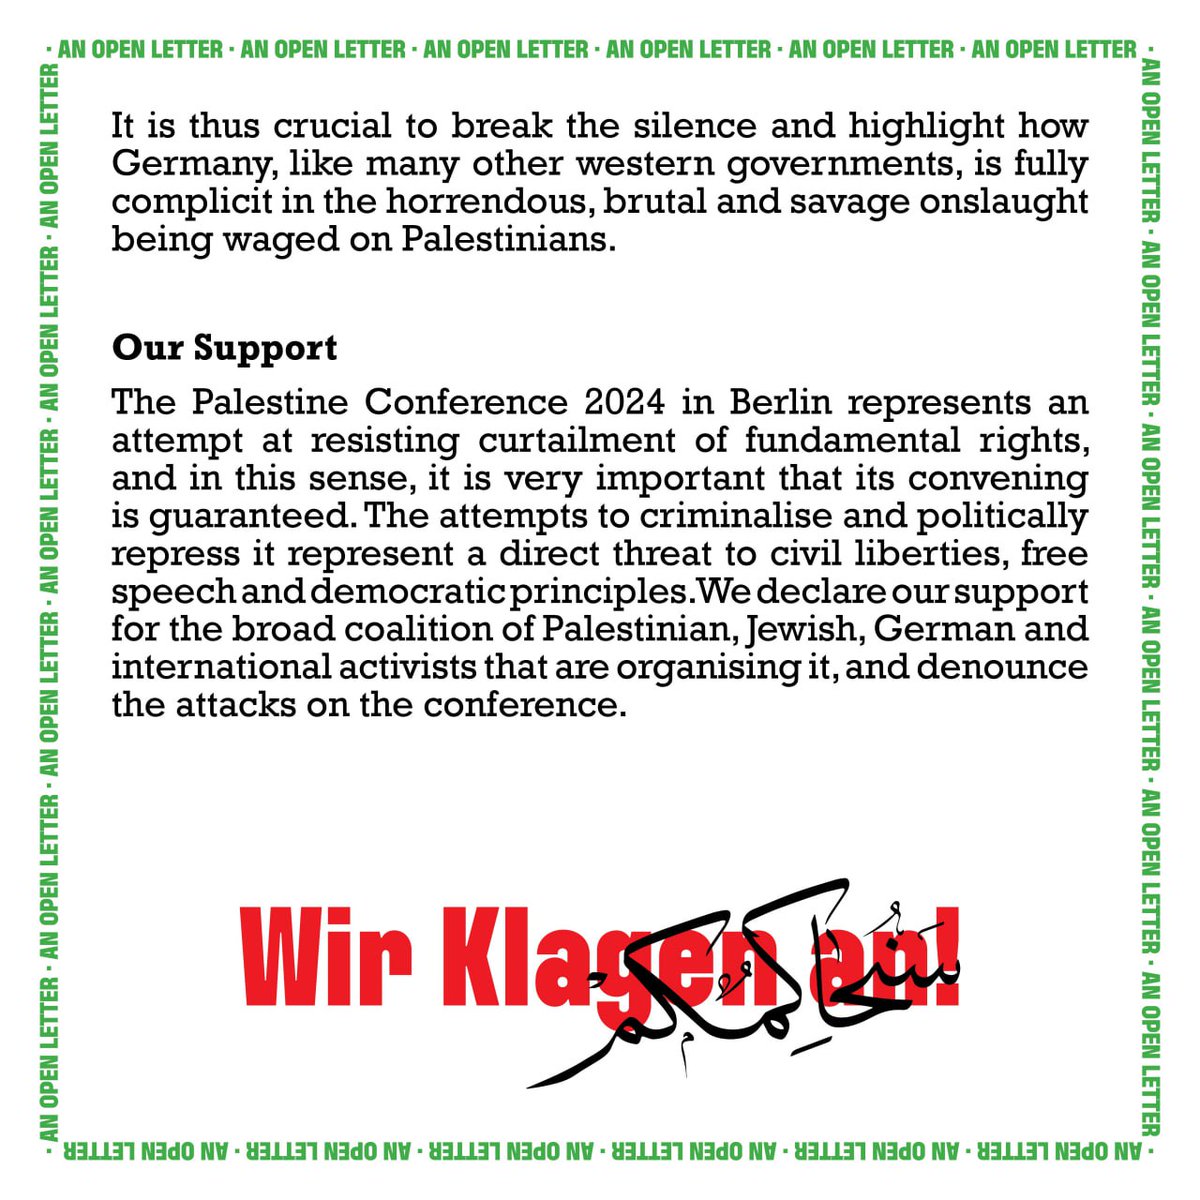 Germany needs to stop supporting genocide in Gaza
The #PalaestinaKongress in Berlin calls on Germany to:
- Stop Providing diplomatic cover to Israel
- Acknowledge international law obligations arising from the Arms Trade Treaty and Stop sending weapons to Israel
#WeAccuseGermany